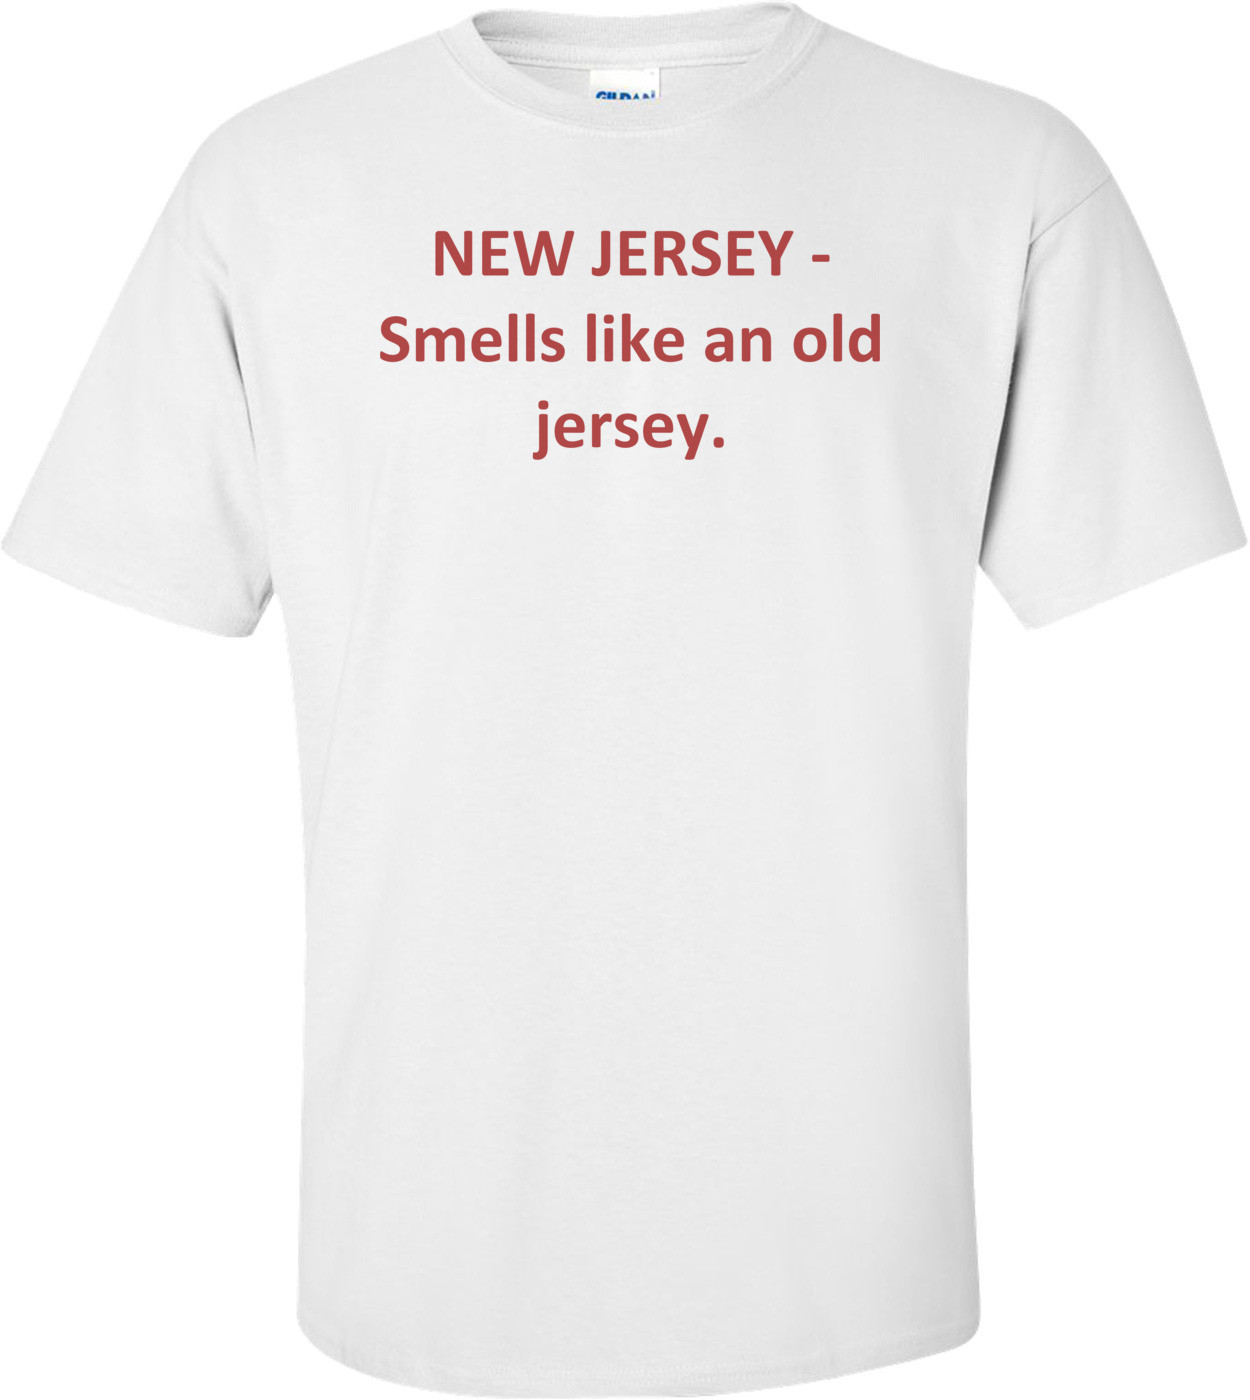 NEW JERSEY - Smells like an old jersey.